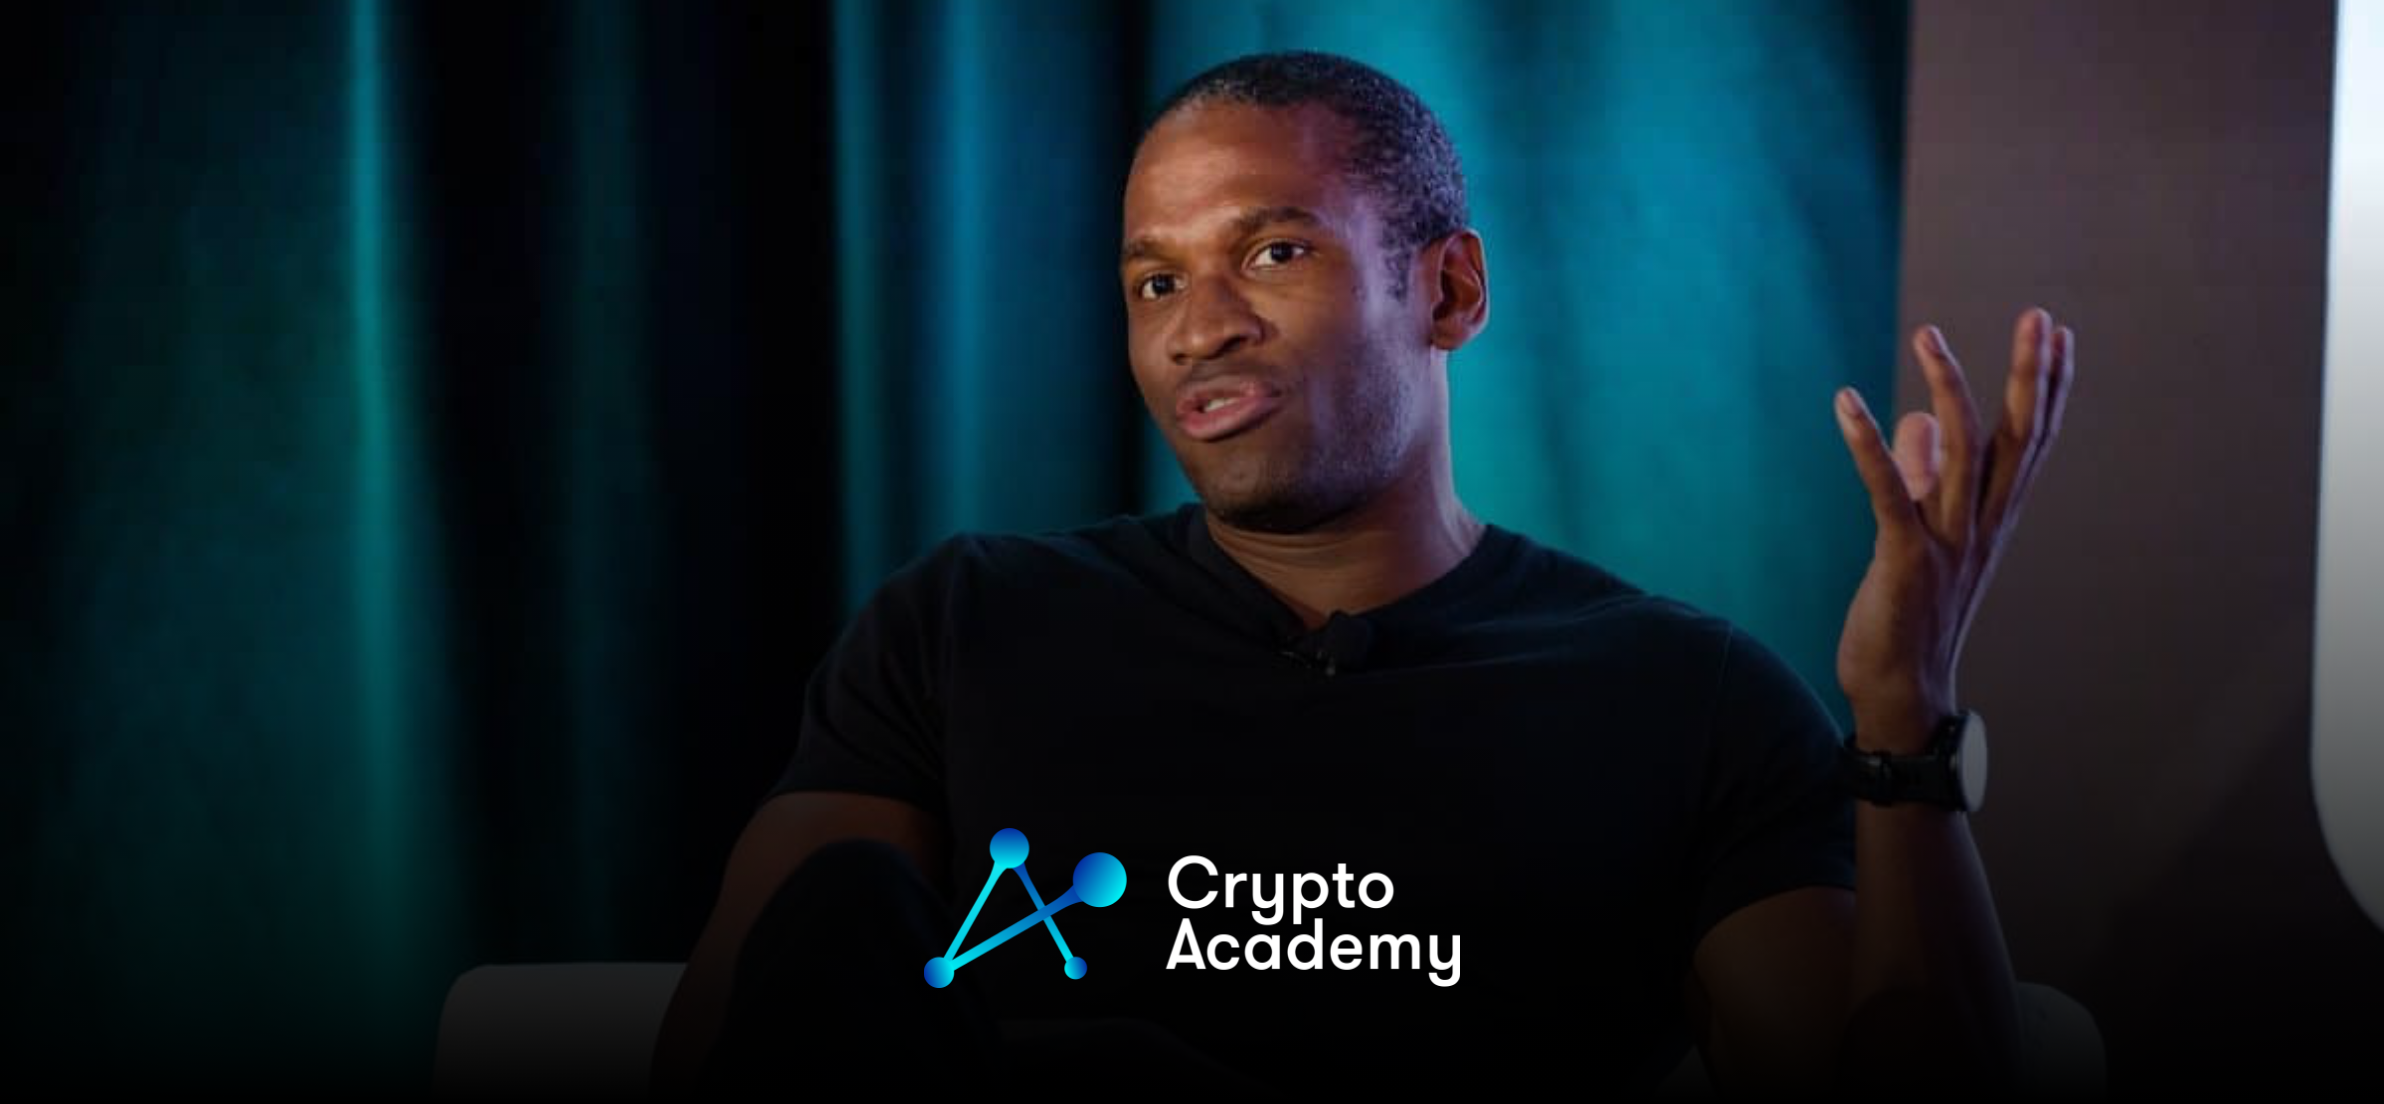 Another One: BitMEX Founder Projects Bitcoin at $1 Million